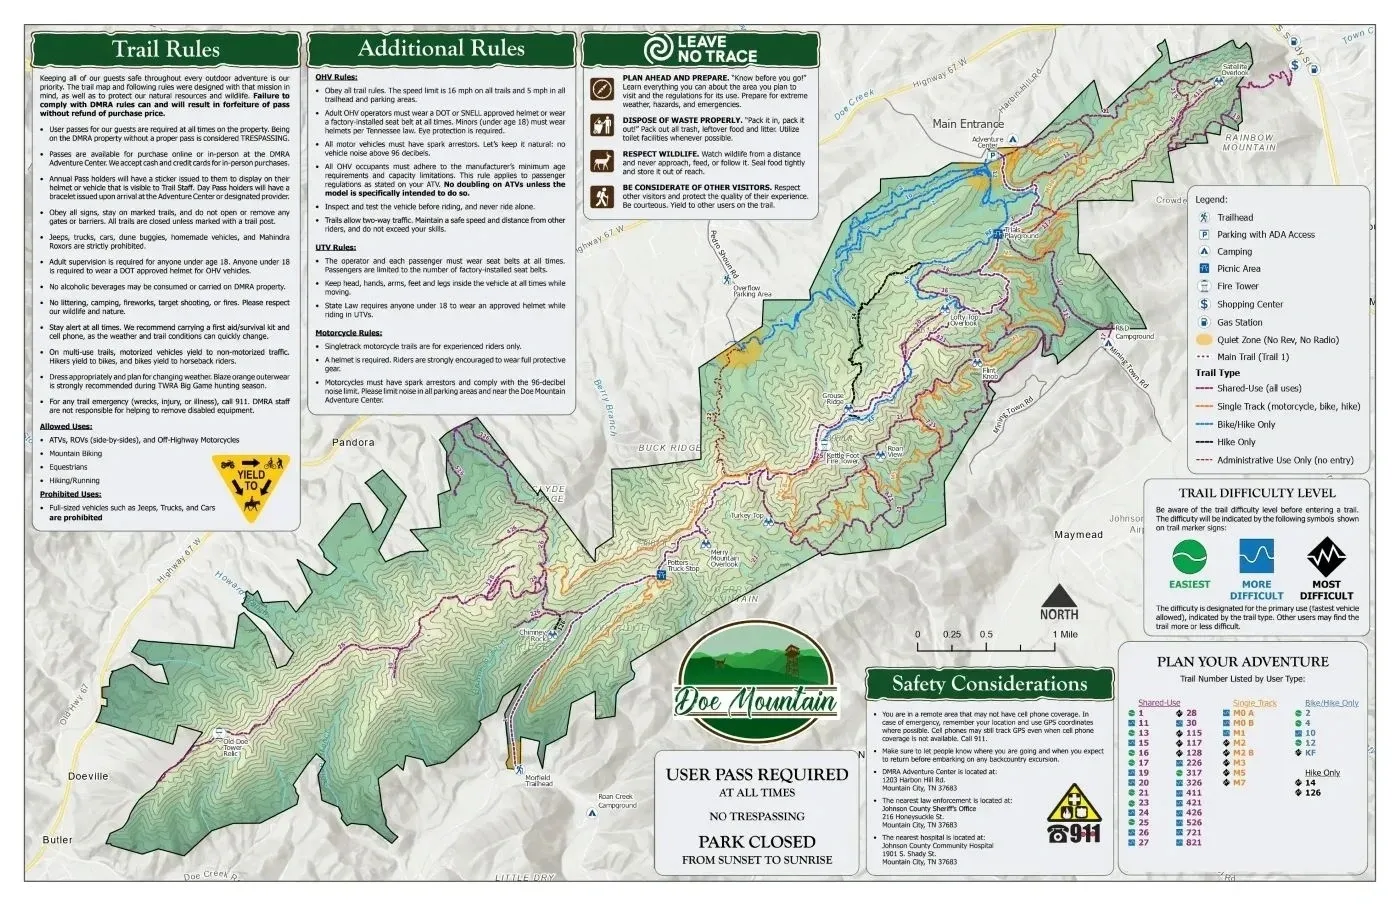 A map of the trail system for hiking.